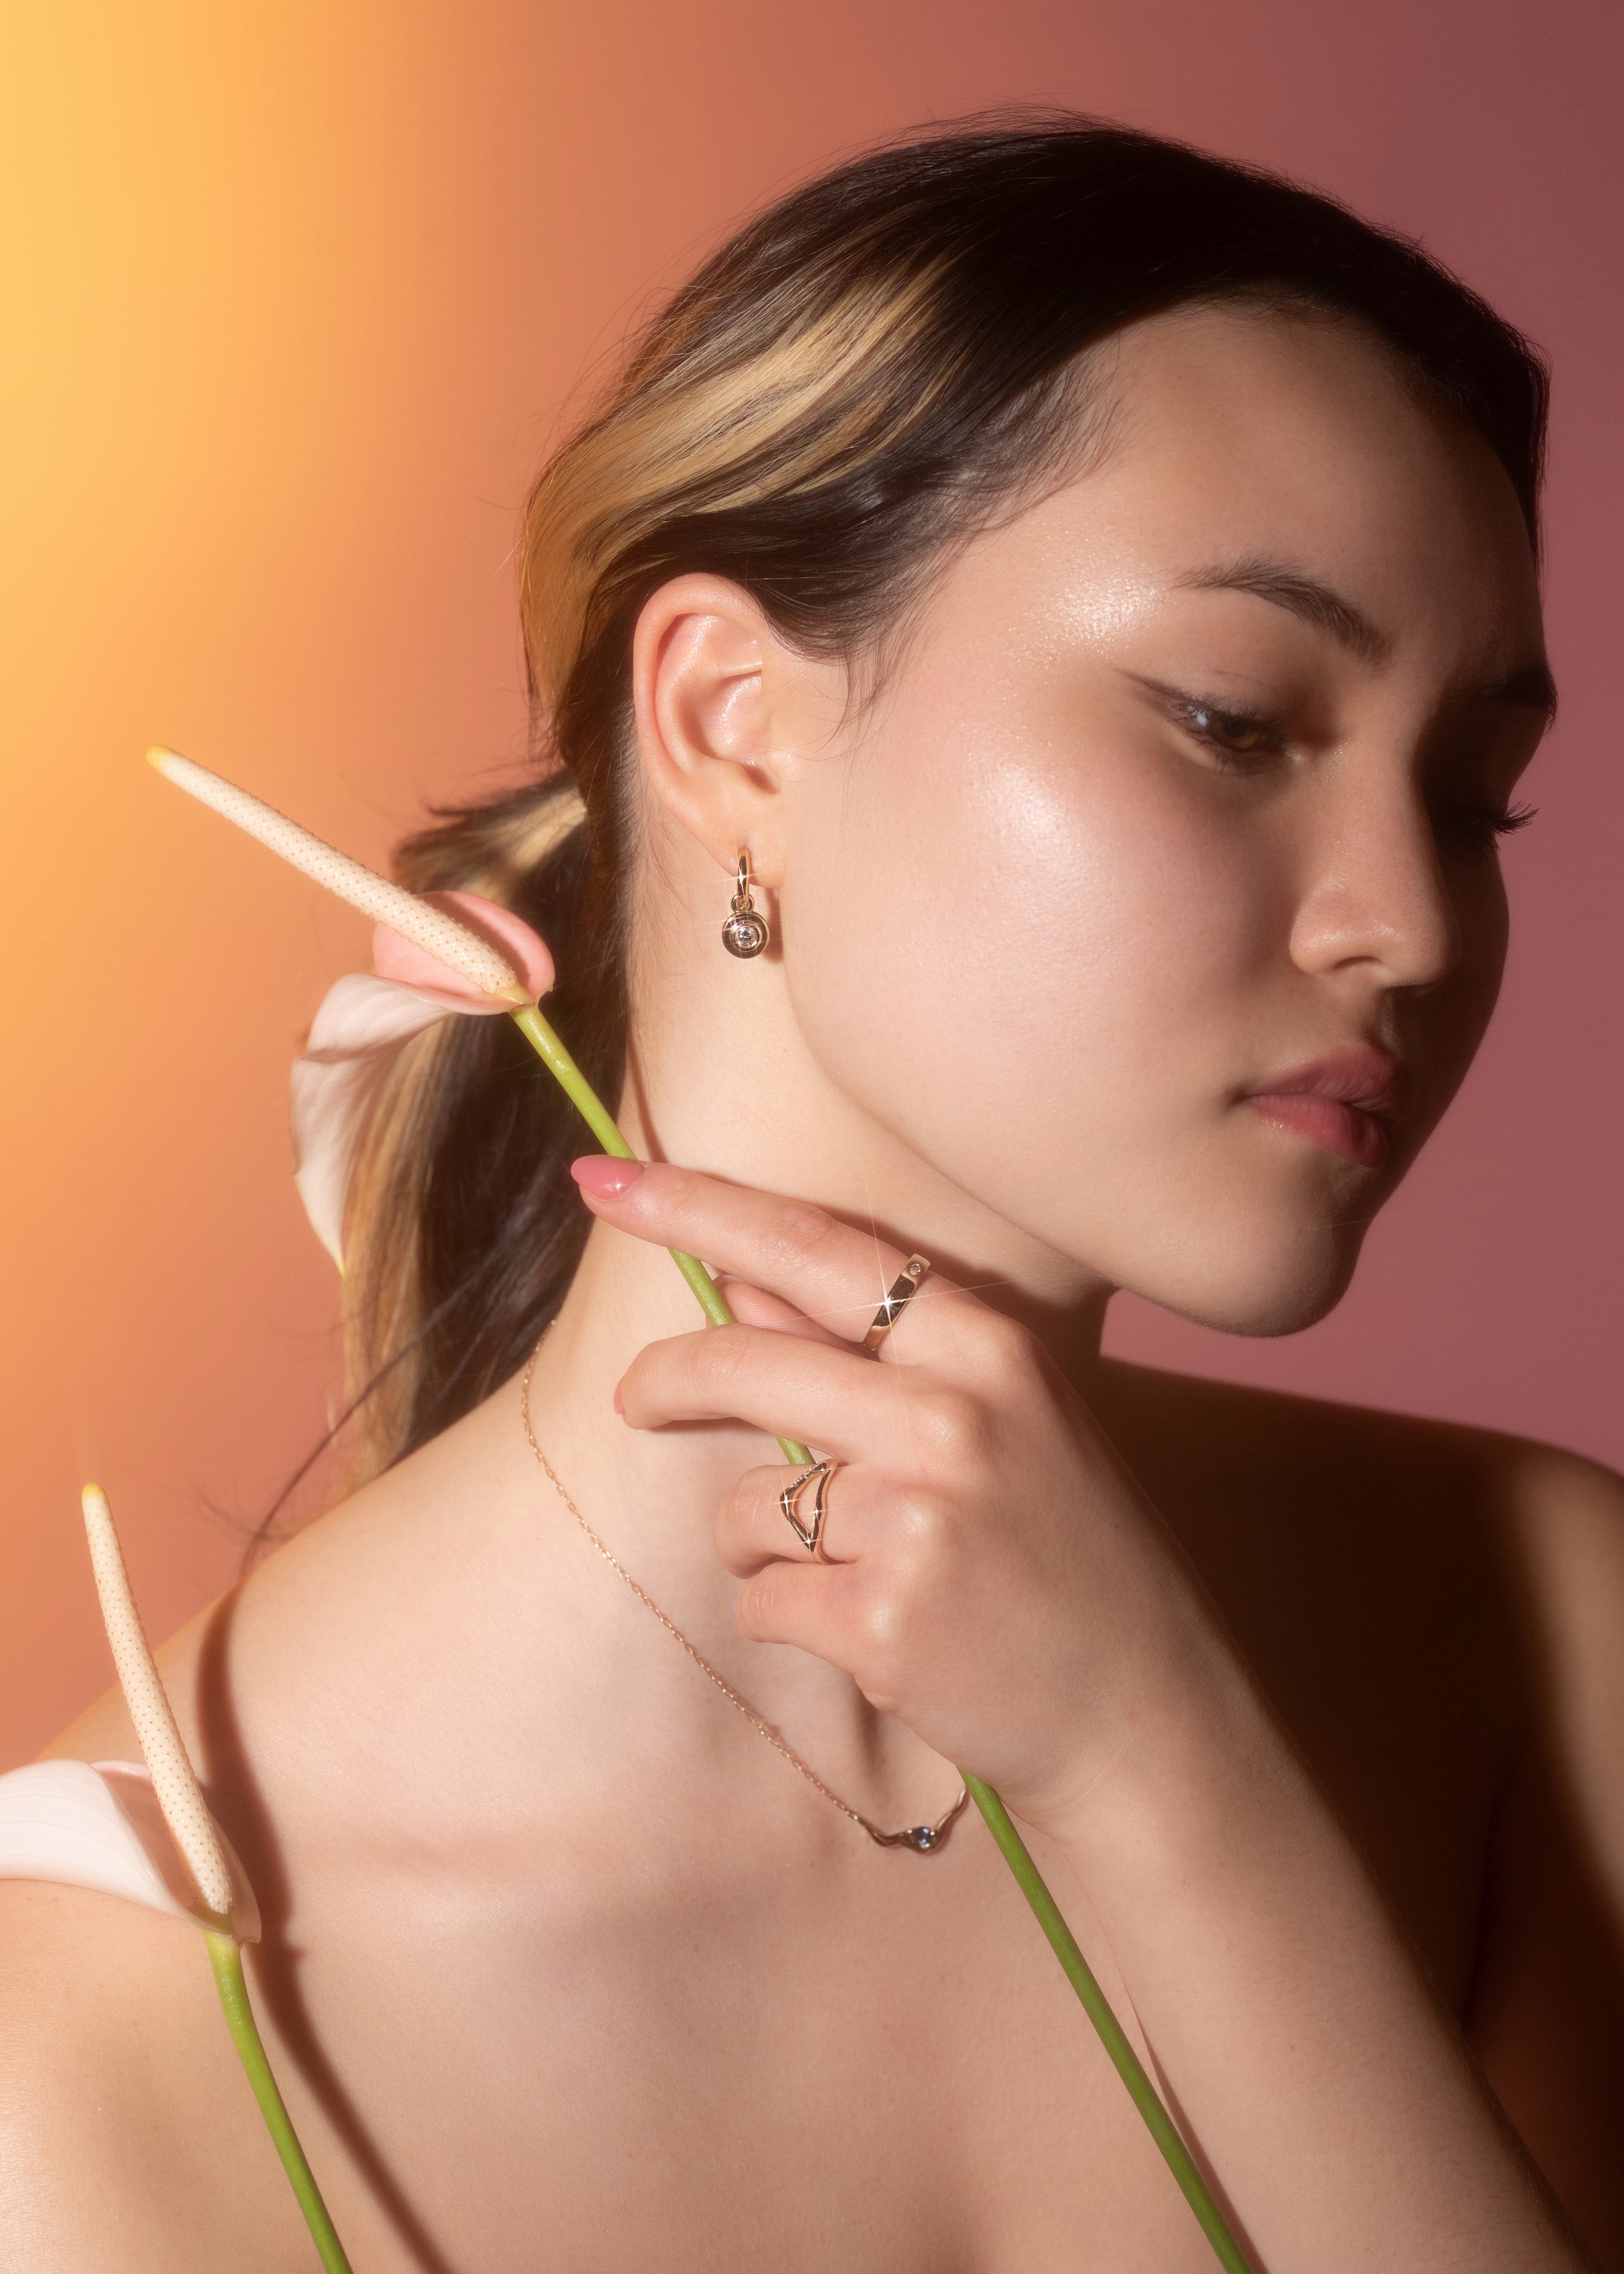 Model wears Kestrel Dillion's Pear Dip Necklace on neck, Tricia Kirkland's Hoop / Diamond Drops in ear, Kestrel Dillion's Split Root Ring on ring finger, and Young Son Song's Sparkling Crescent Band on index finger